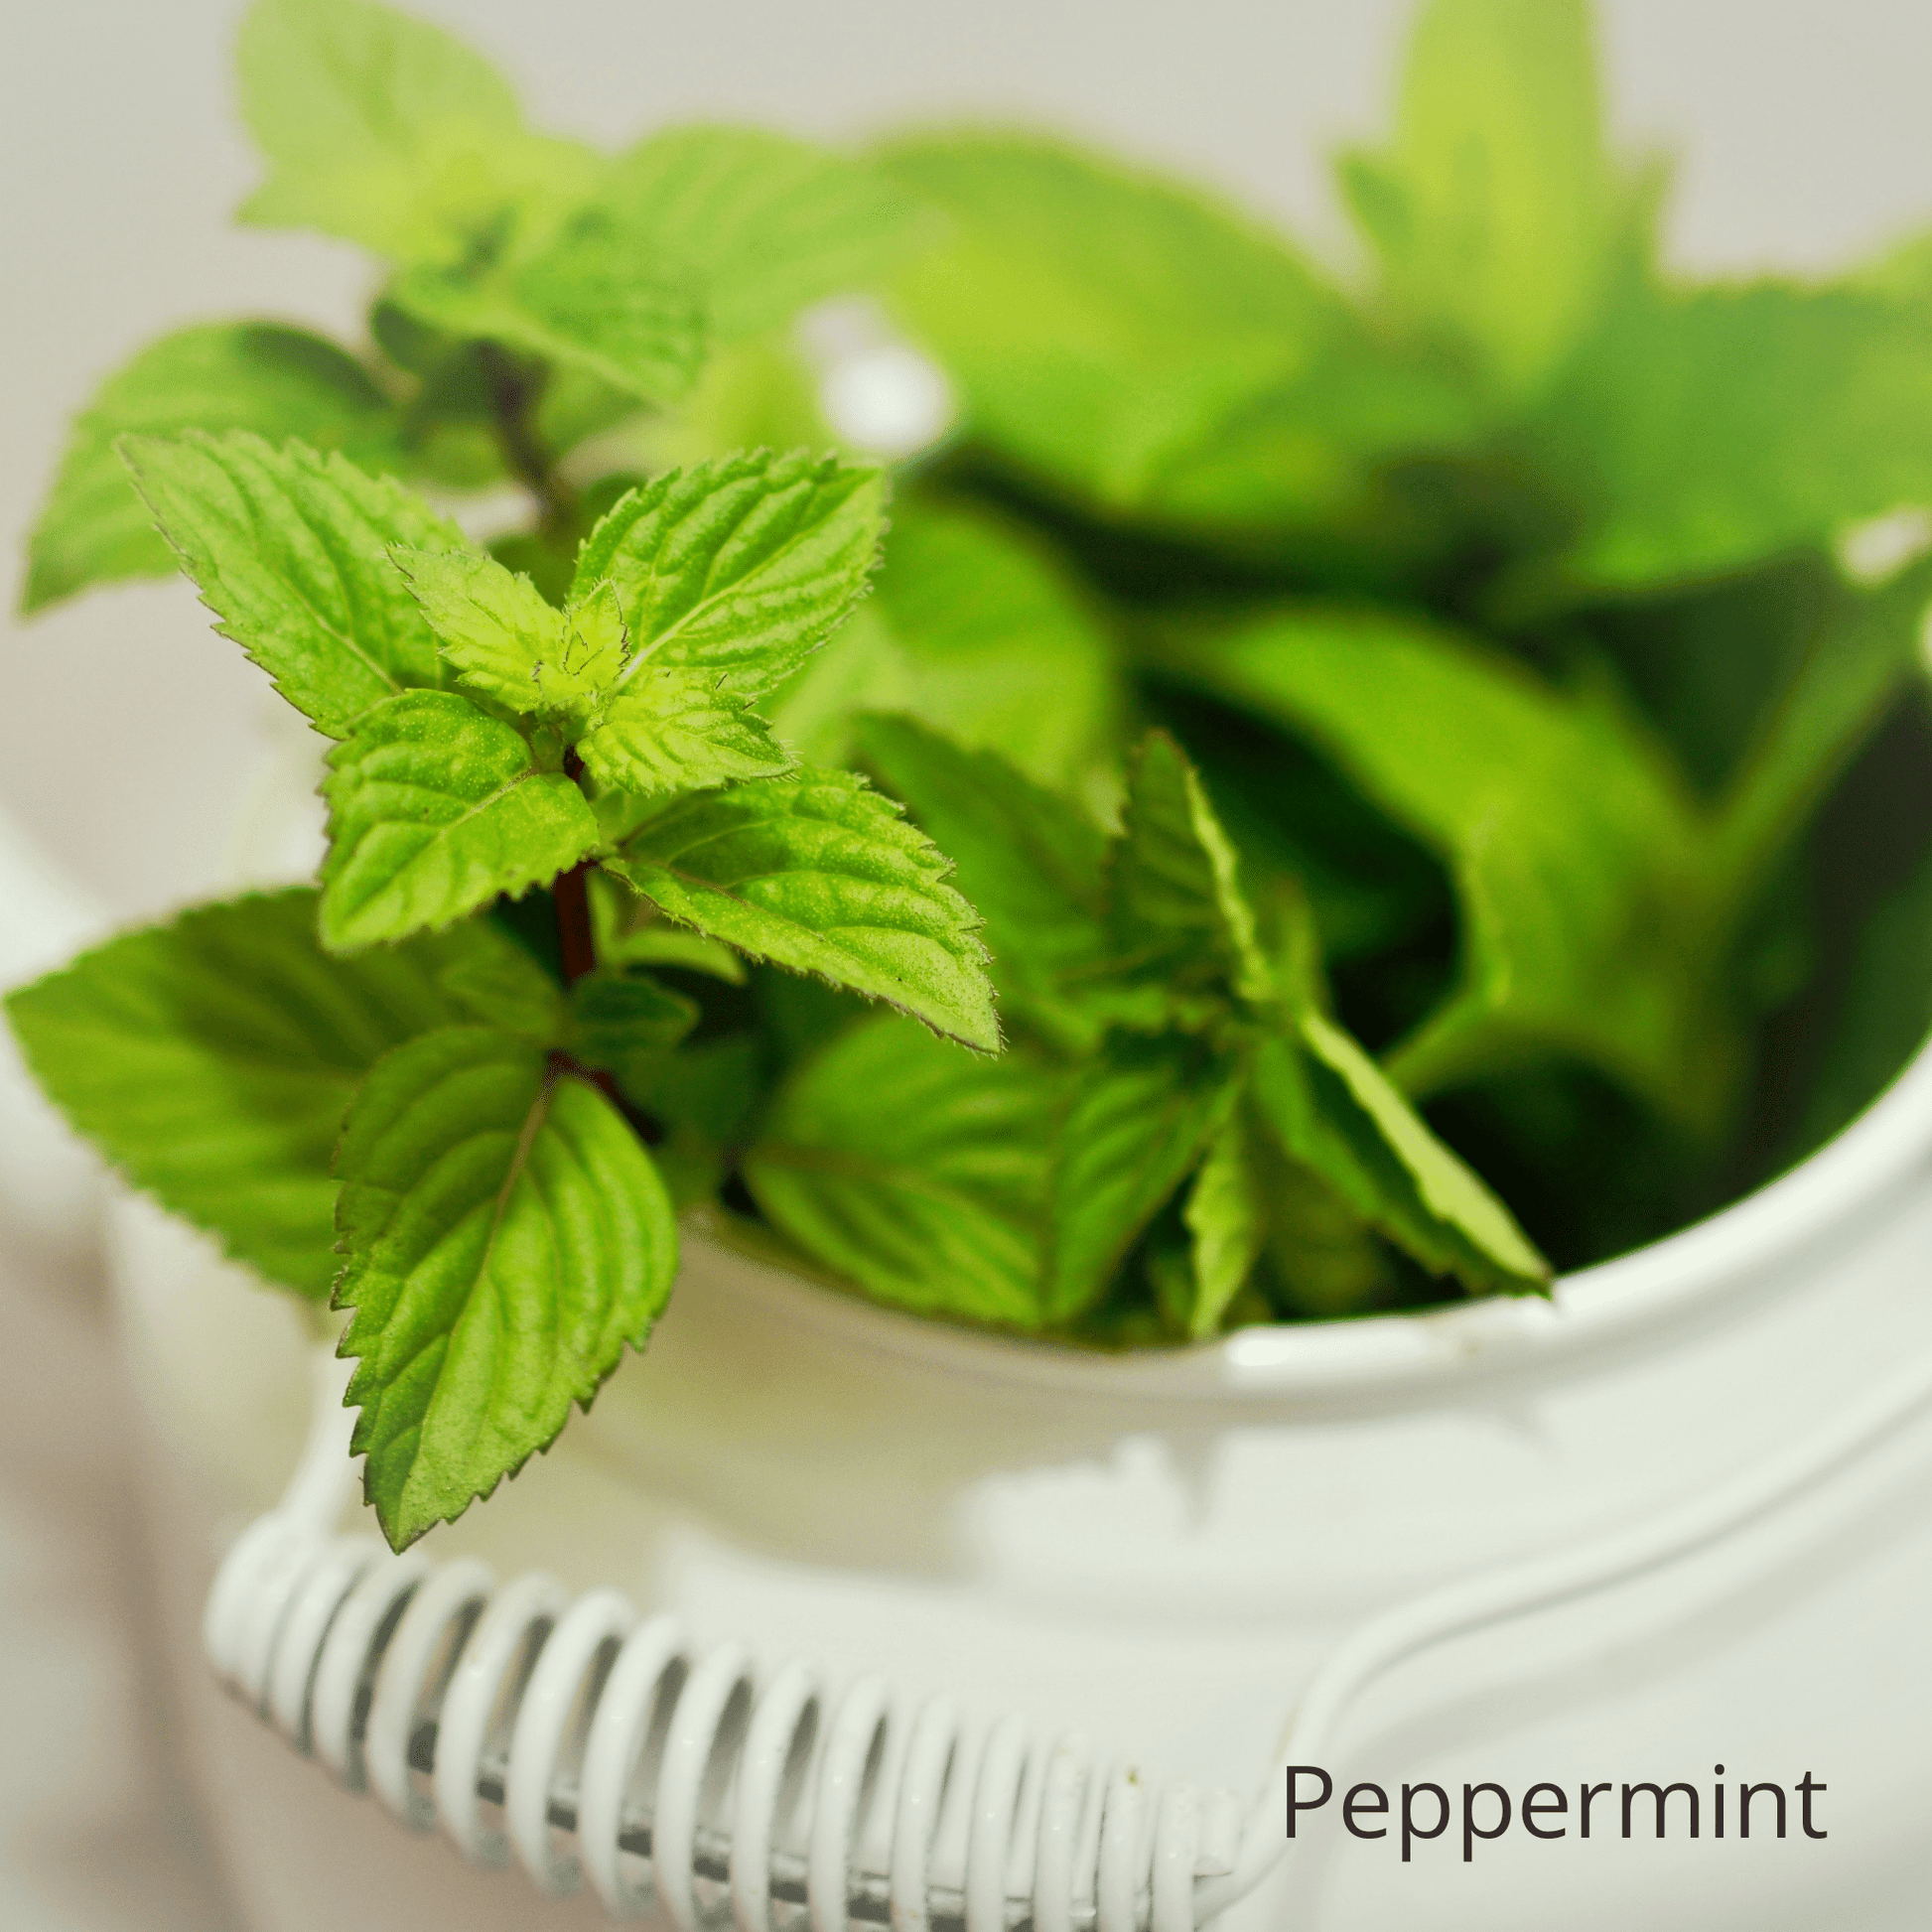 Be Green Bath and Body Deodorant contains peppermint oil